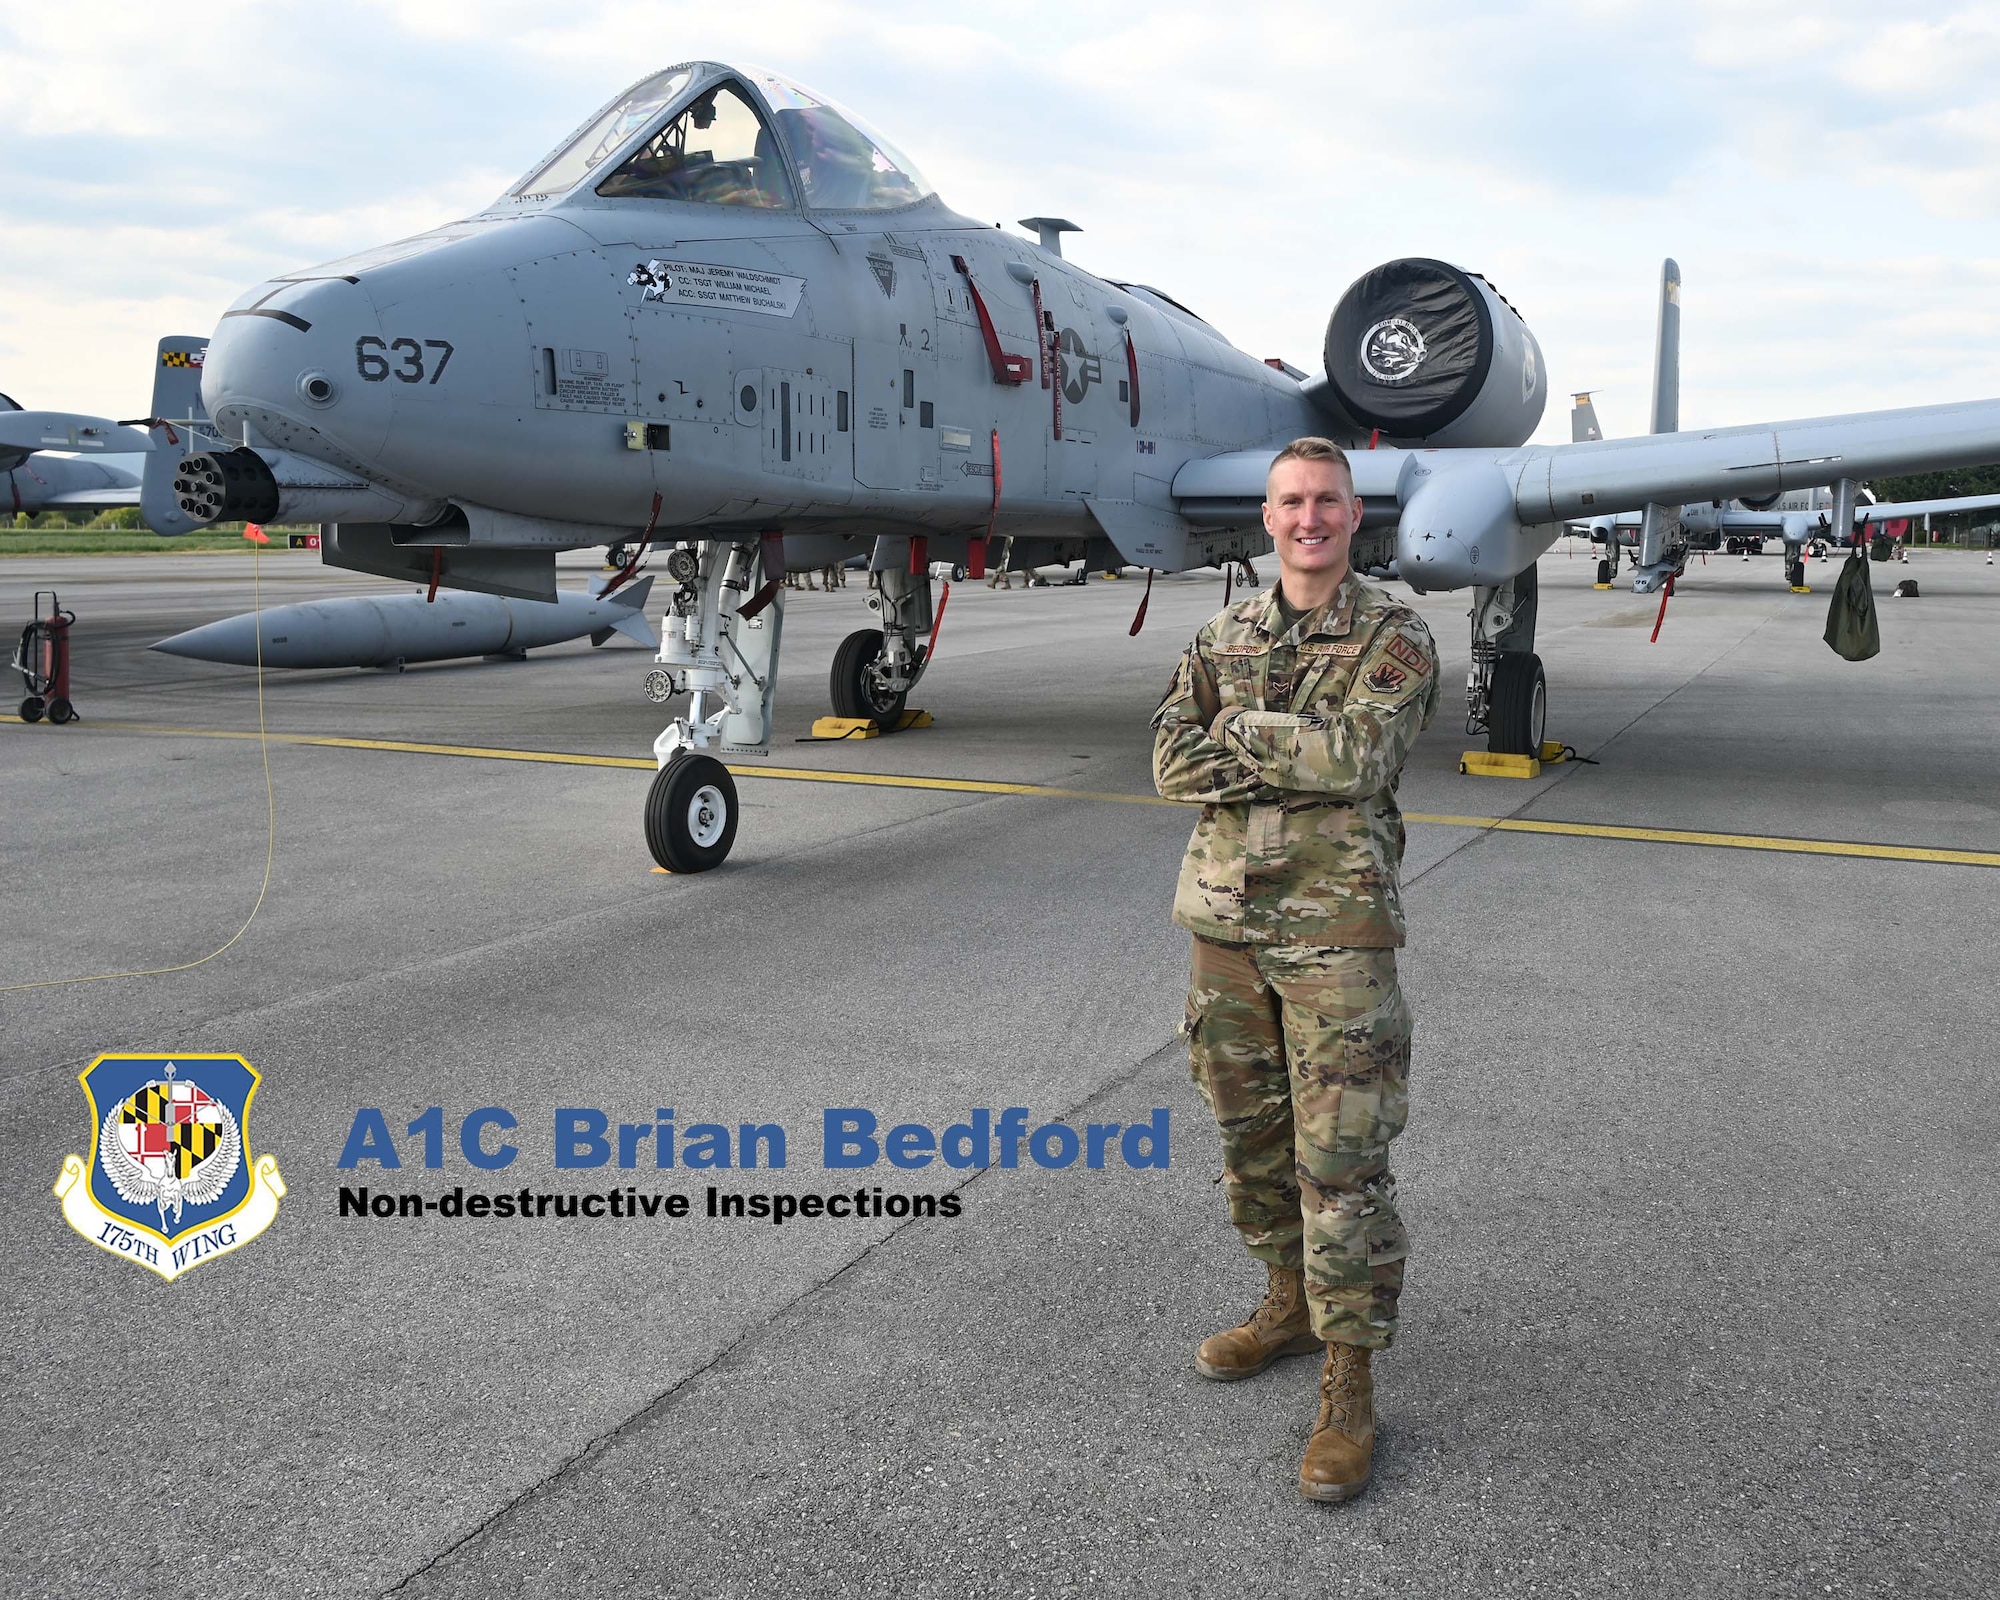 U.S. Air Force Airman 1st Class Brian Bedford, a non-destructive inspections journeyman assigned to the 175th Aircraft Maintenance Squadron, Maryland Air National Guard, poses for a photograph in front of an A-10C Thunderbolt II aircraft during Swift Response at Ohrid St. Paul The Apostle Airport in Ohrid, North Macedonia, May 7, 2022.